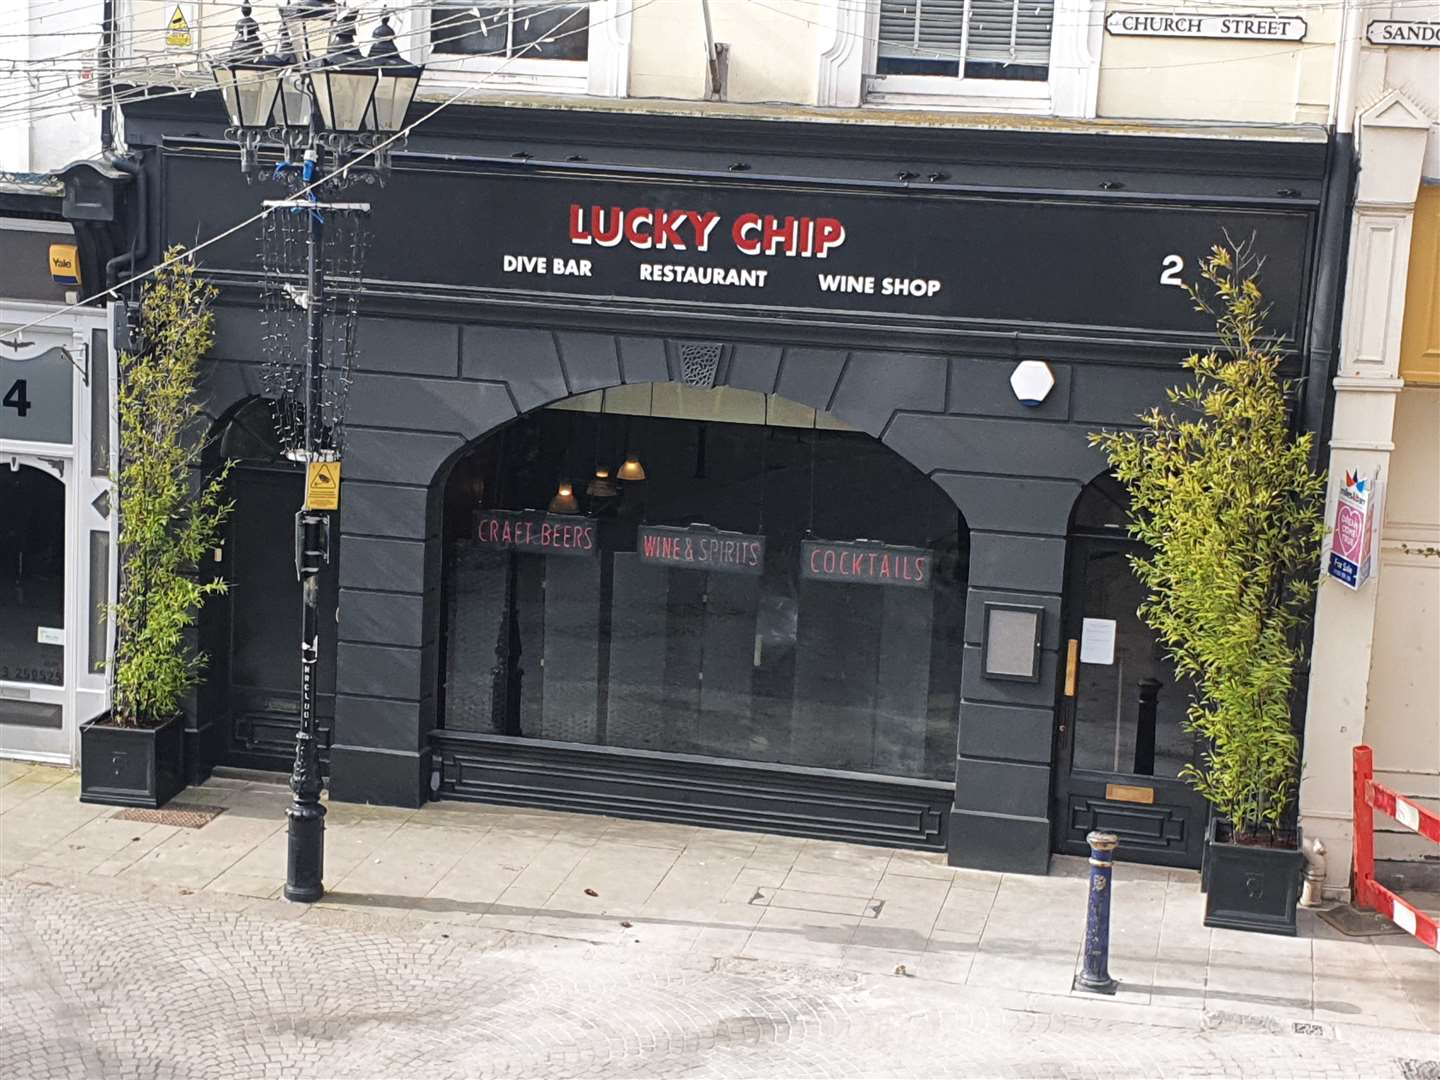 Lucky Chip is opening in Folkestone